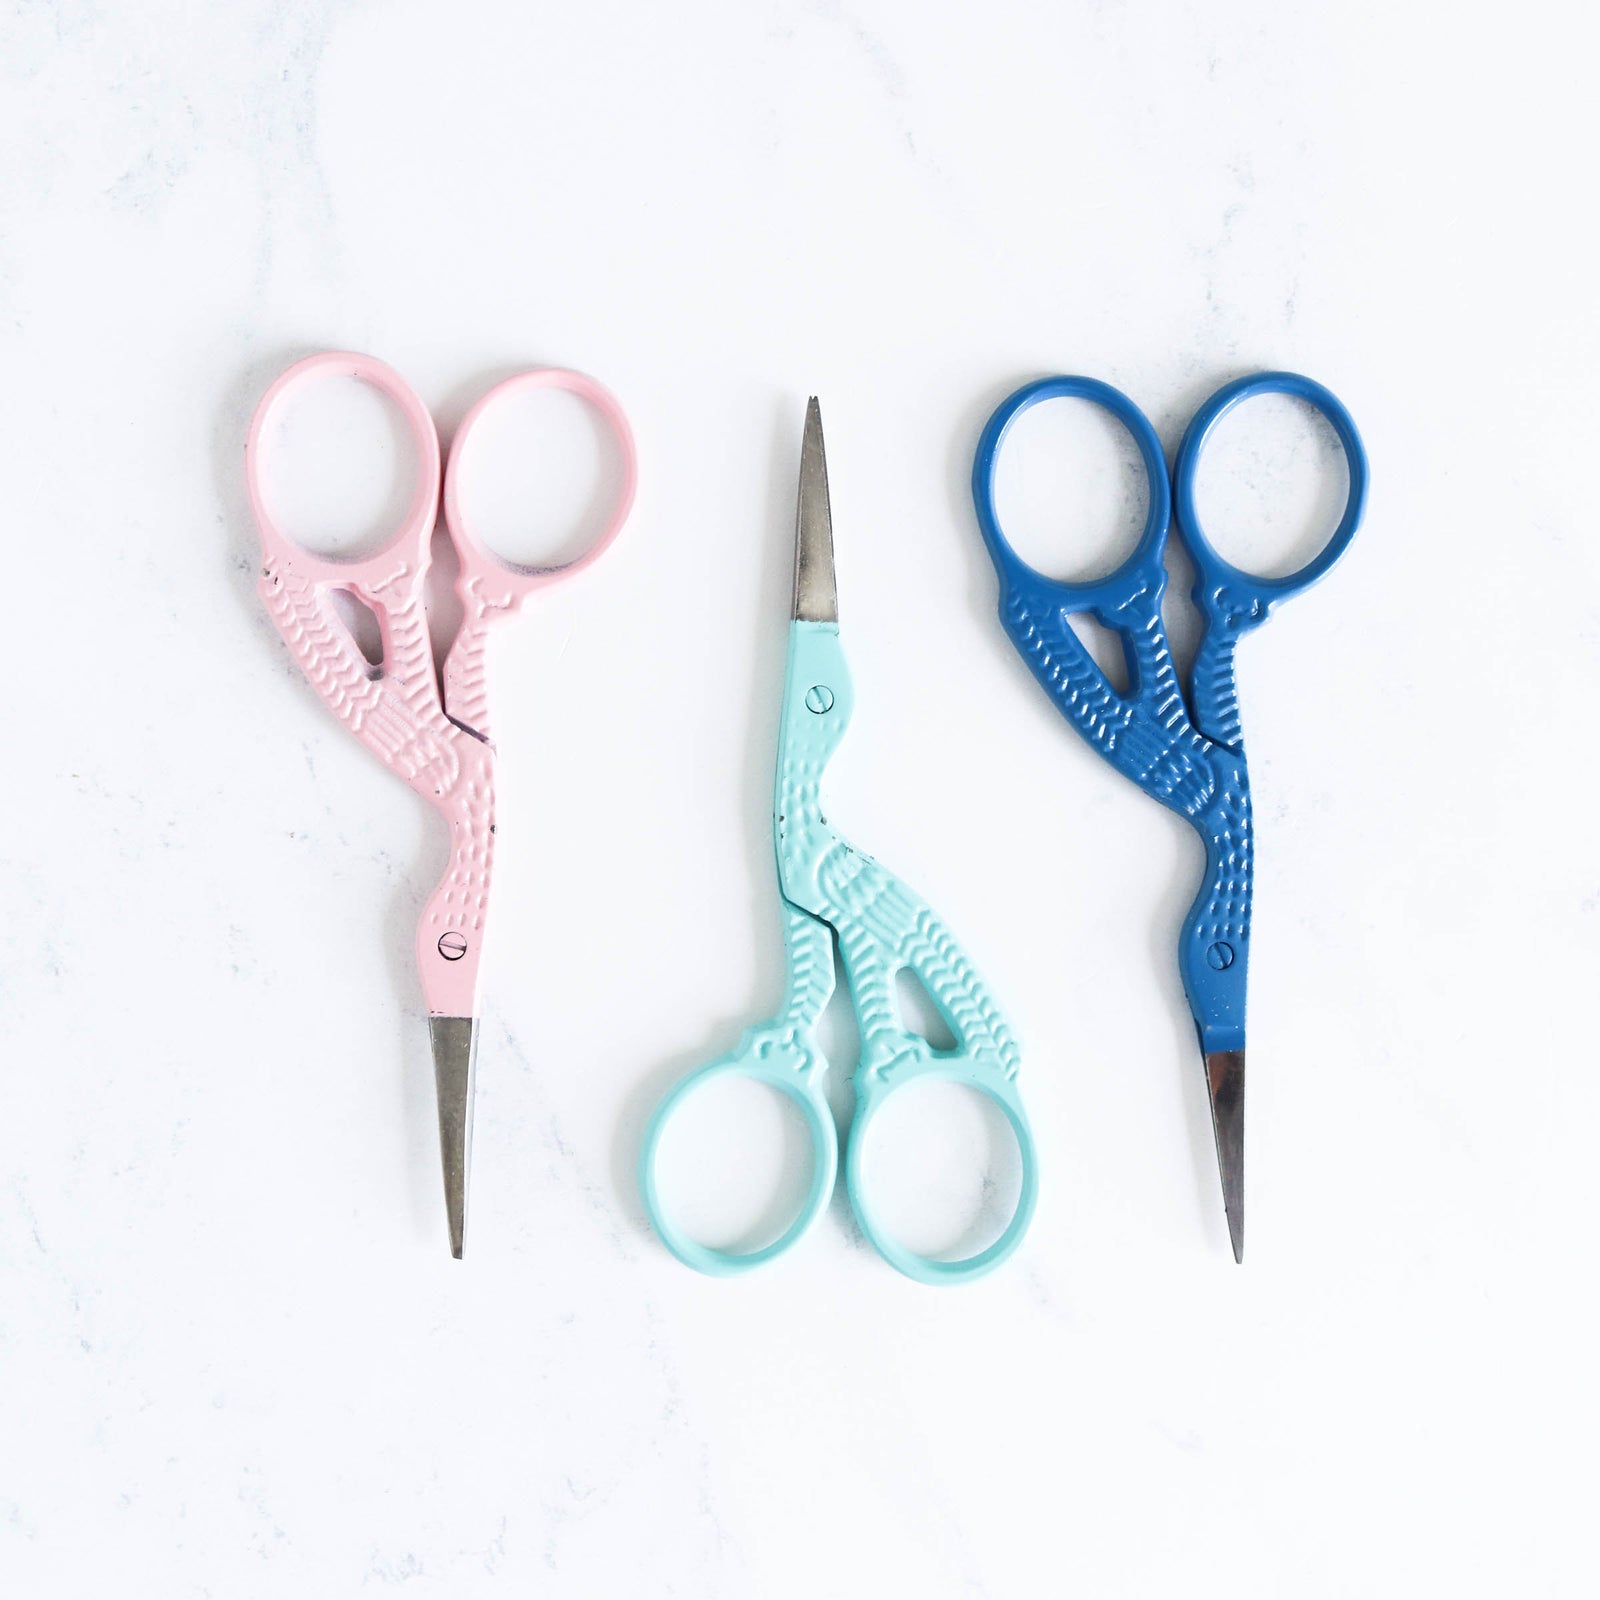 Patterned Embroidery Scissors - Pink Leopard - Stitched Modern